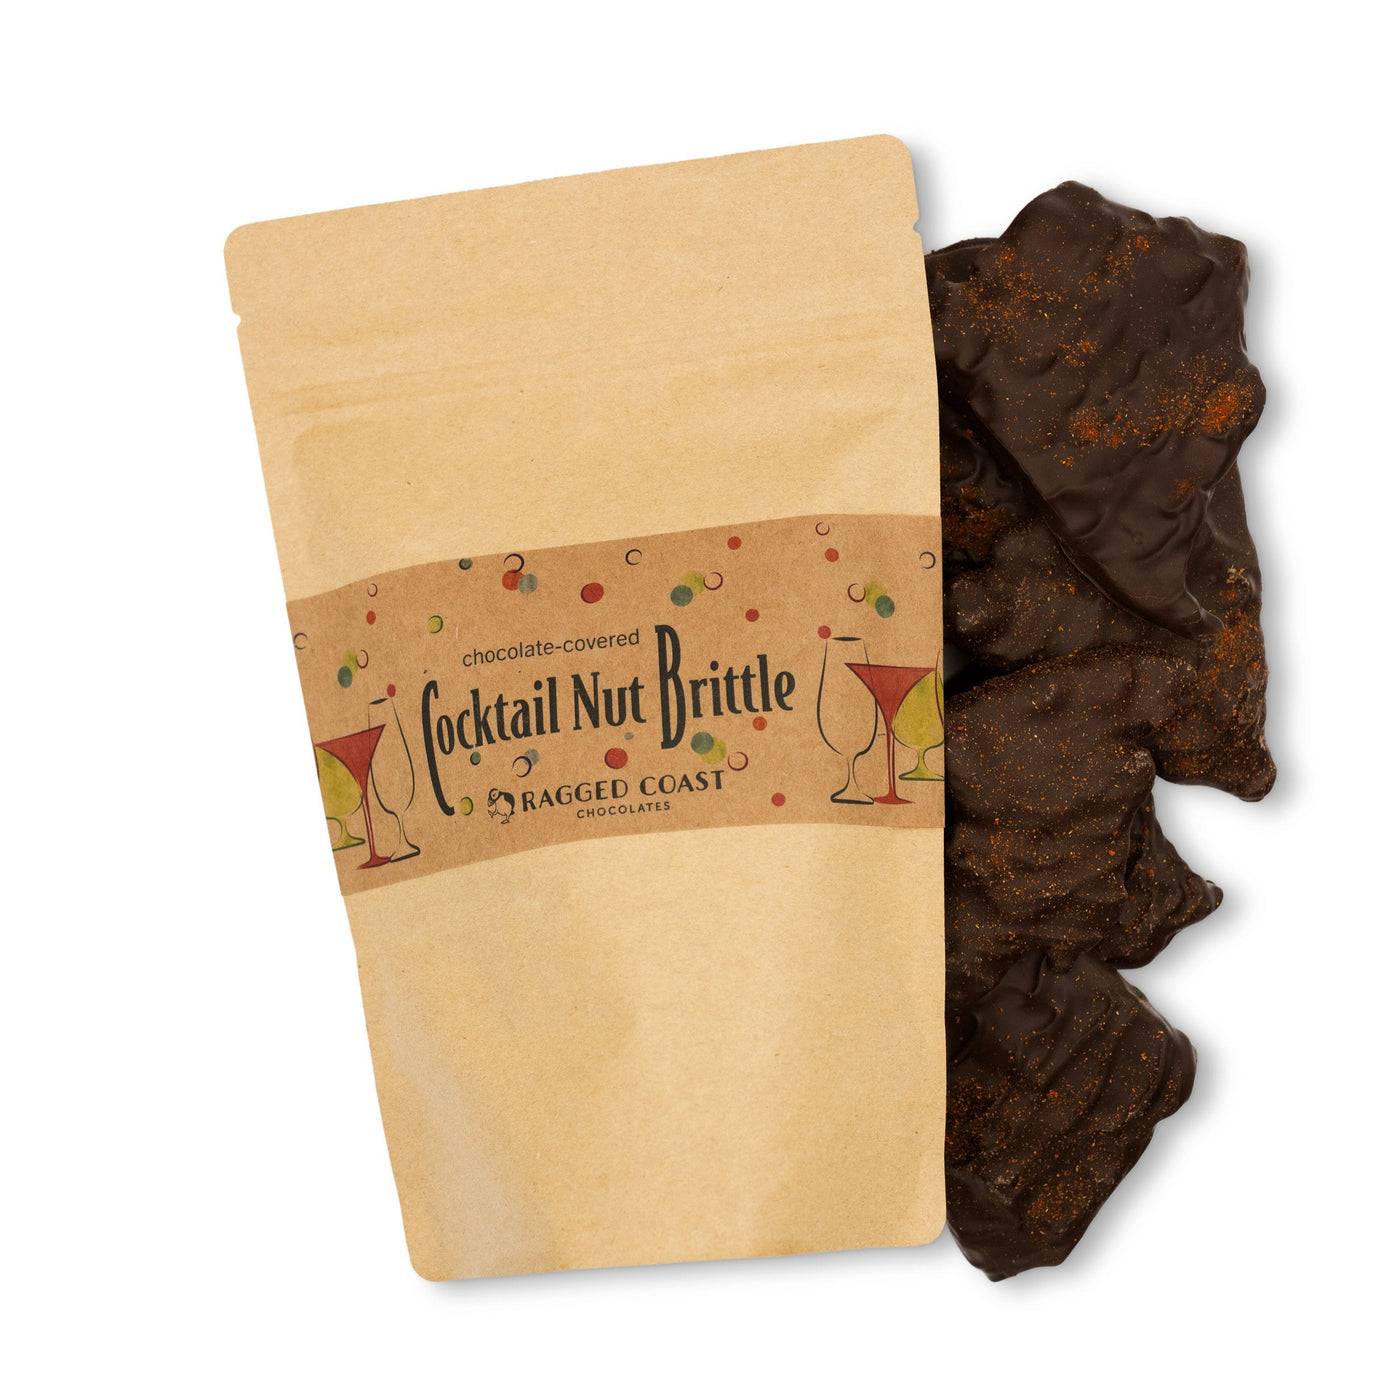 Dark Chocolate-Covered Cocktail Nut Brittle - 9-ounce bag